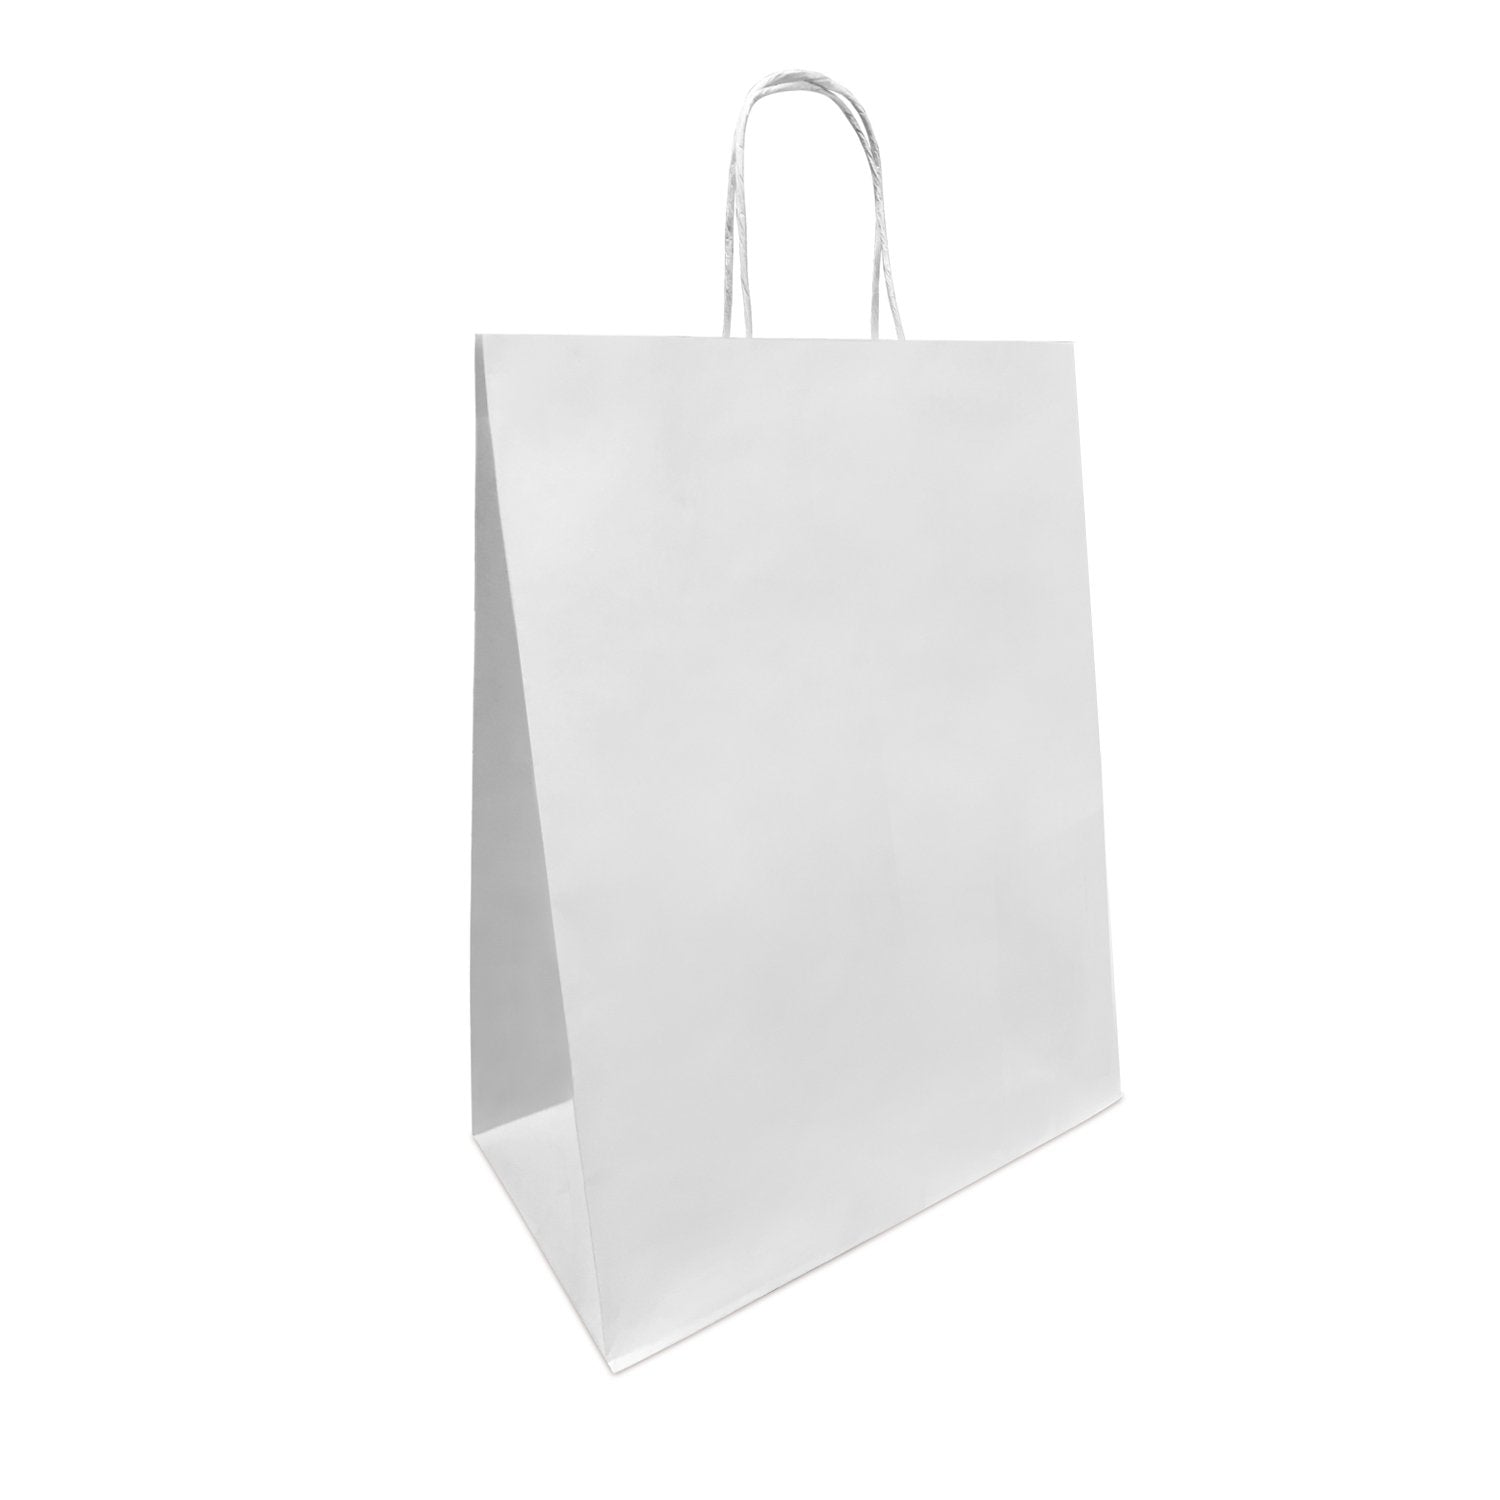 250 Pcs, Mart, 13x7x17 inches, White Paper Bags, with Twisted Handle